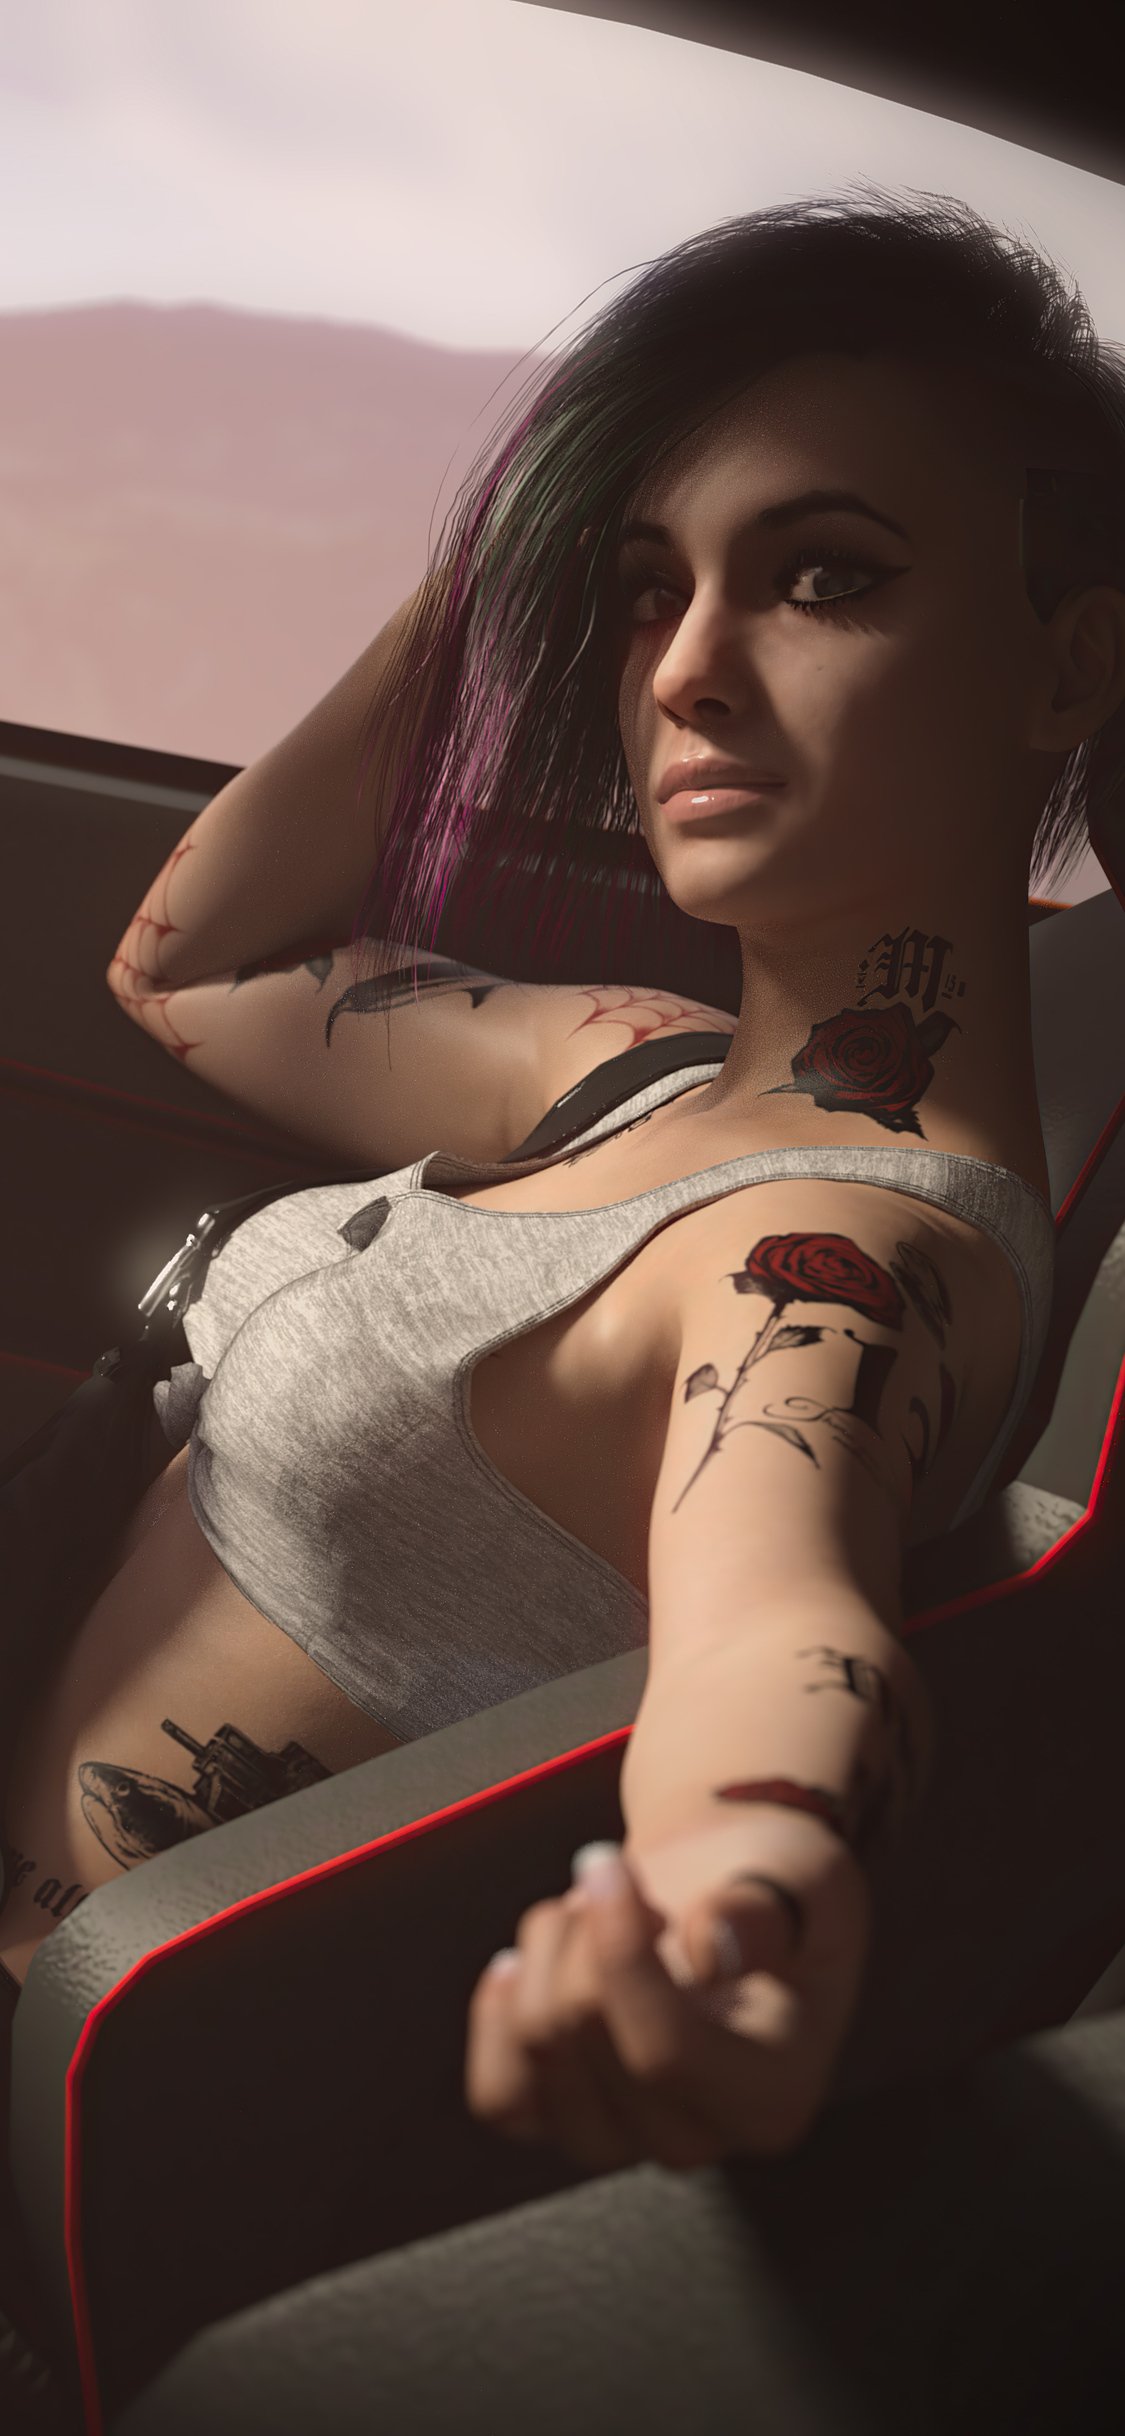 Judy Alvarez From Cyberpunk 2077 4k iPhone XS, iPhone iPhone X HD 4k Wallpaper, Image, Background, Photo and Picture